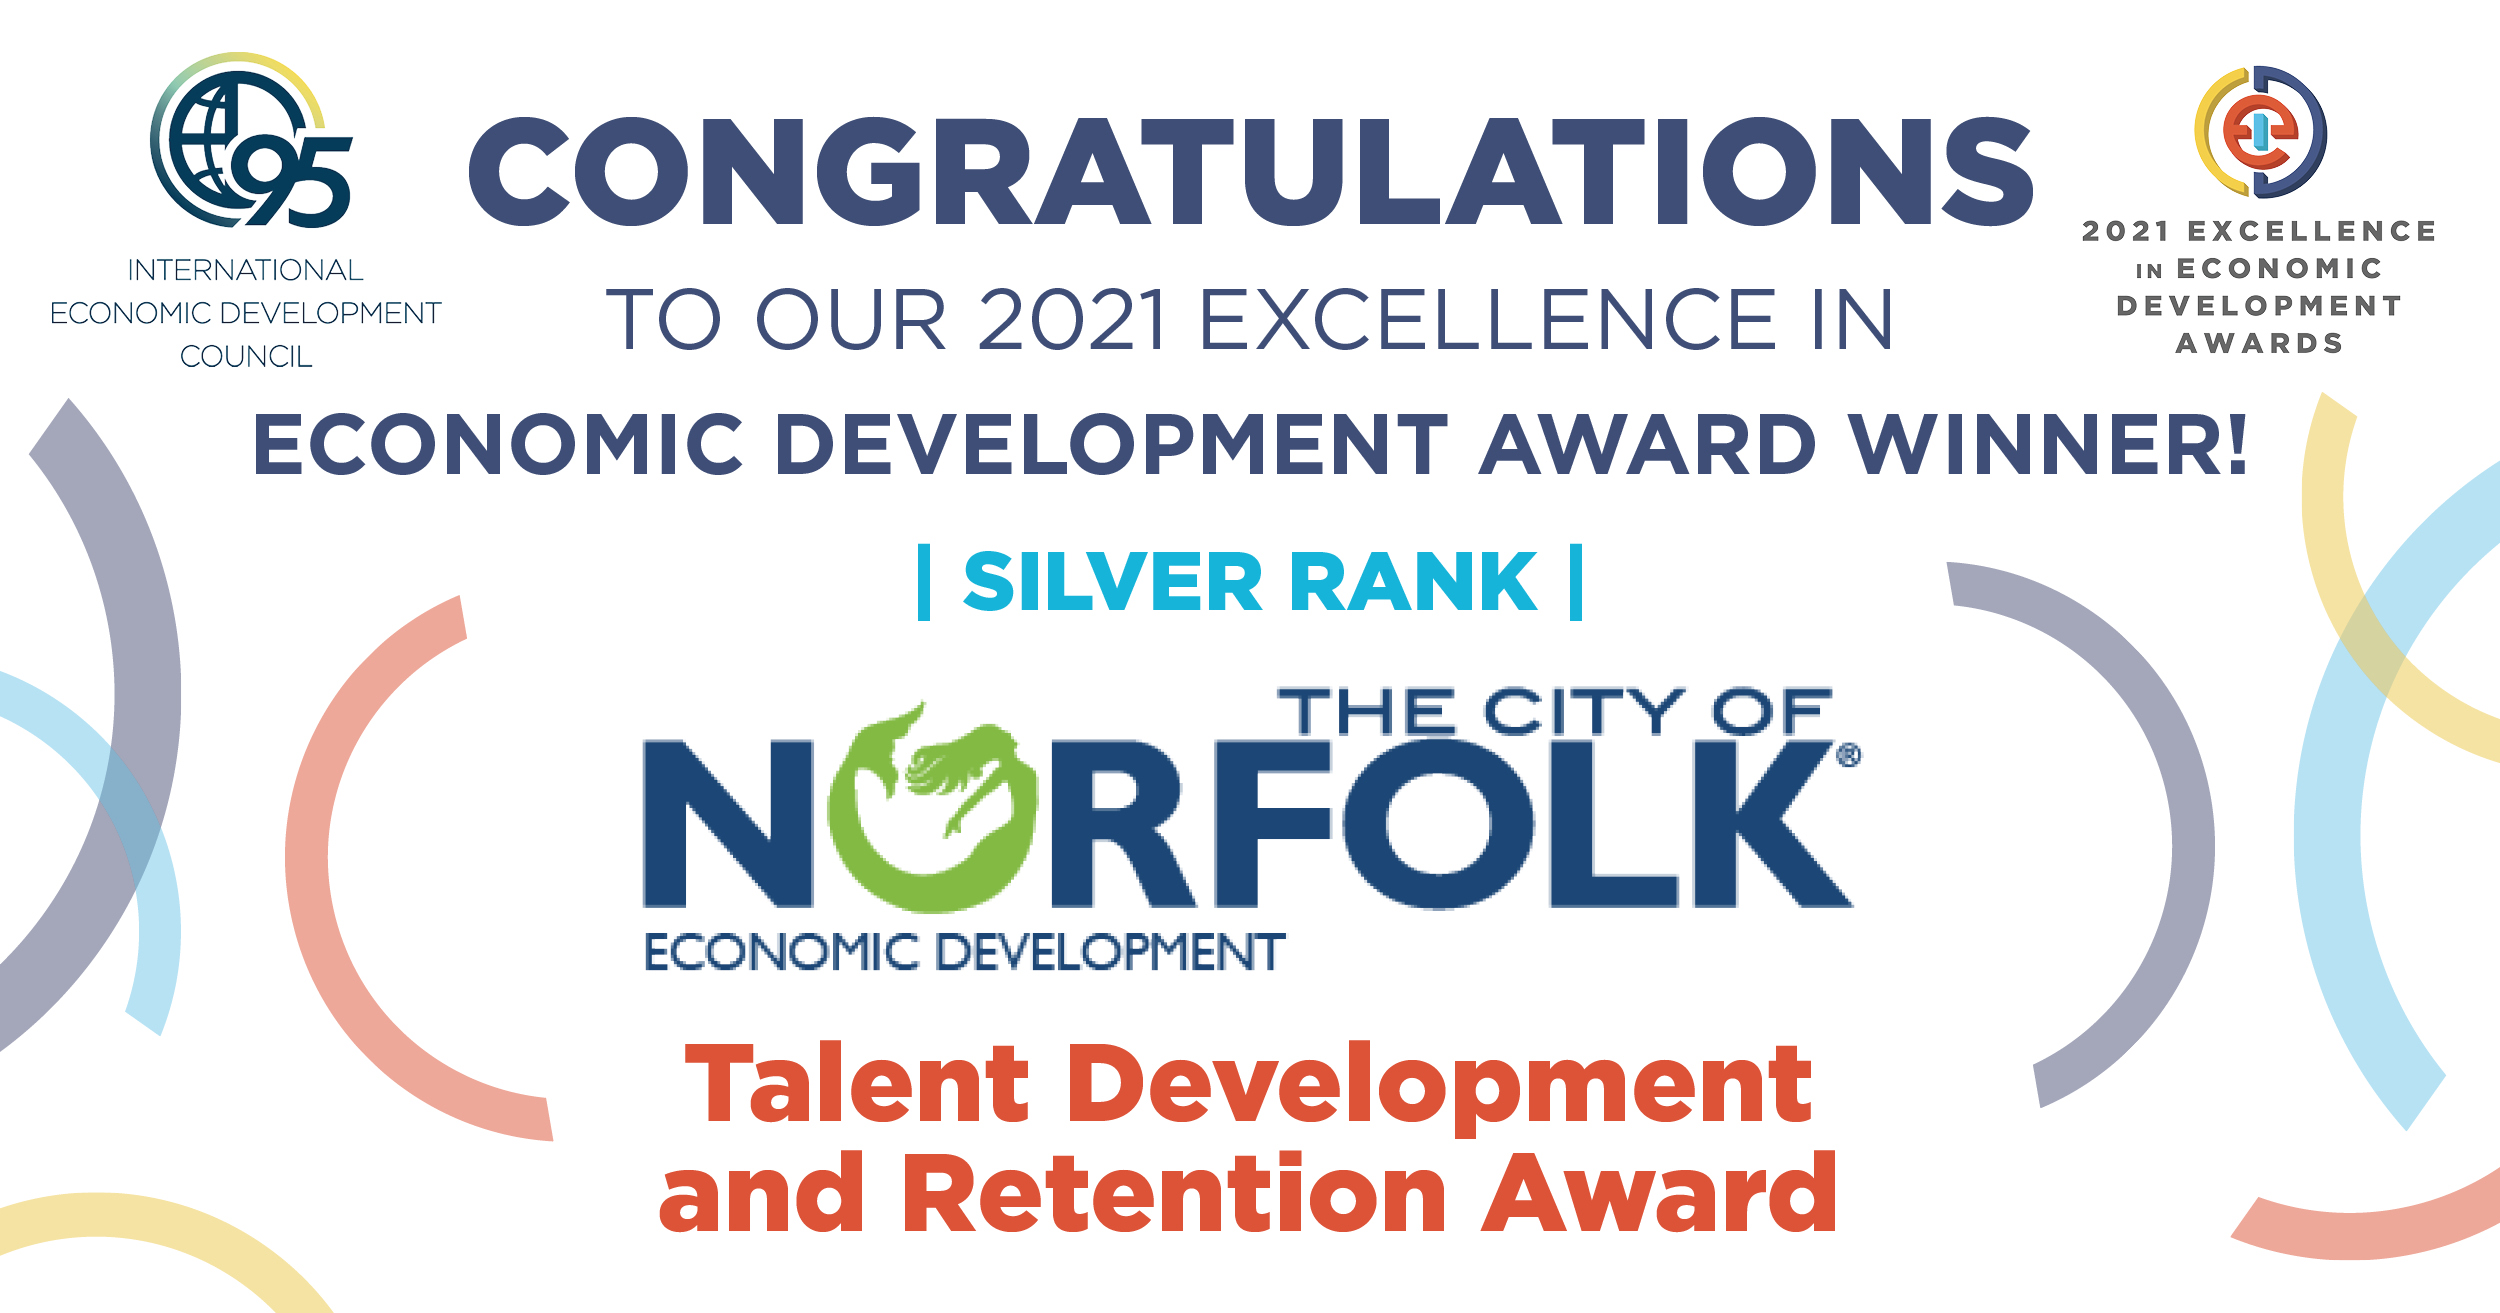 The City of Norfolk Department of Economic Development Receives Excellence in Economic Development Award from the International Economic Development Council